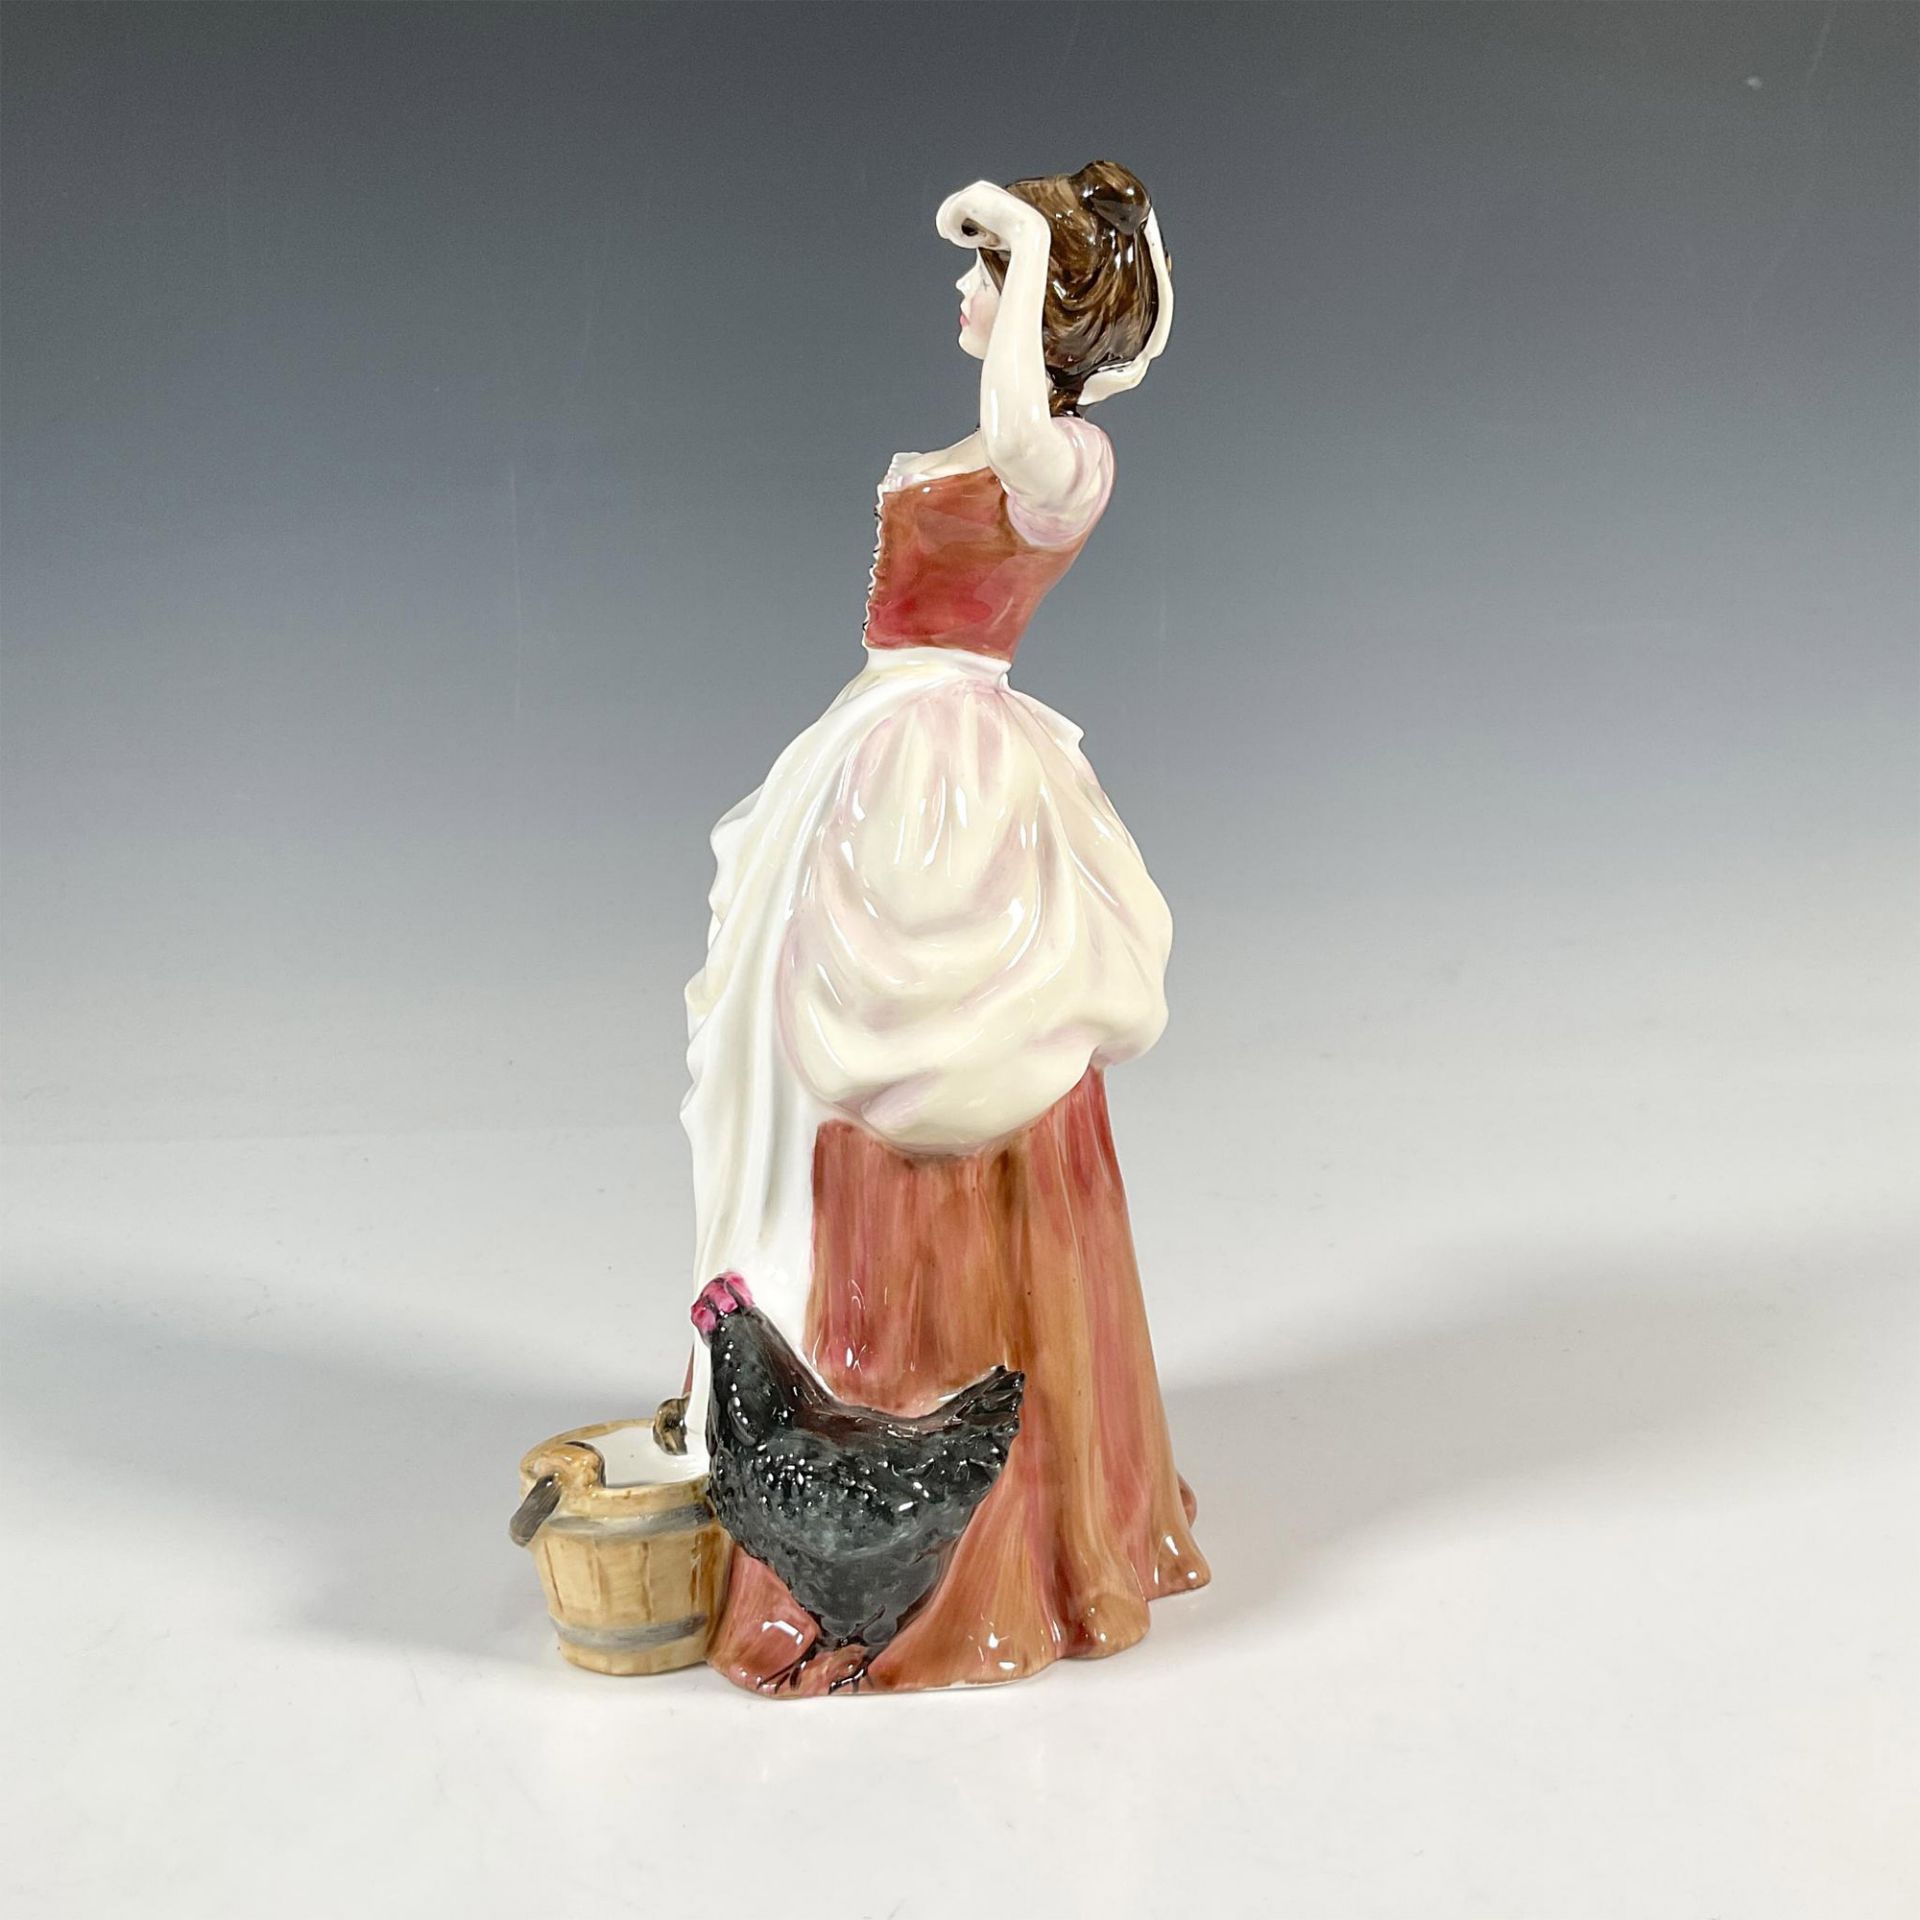 Tess of the D'Urbervilles HN3846 - Royal Doulton Figurine - Image 2 of 5